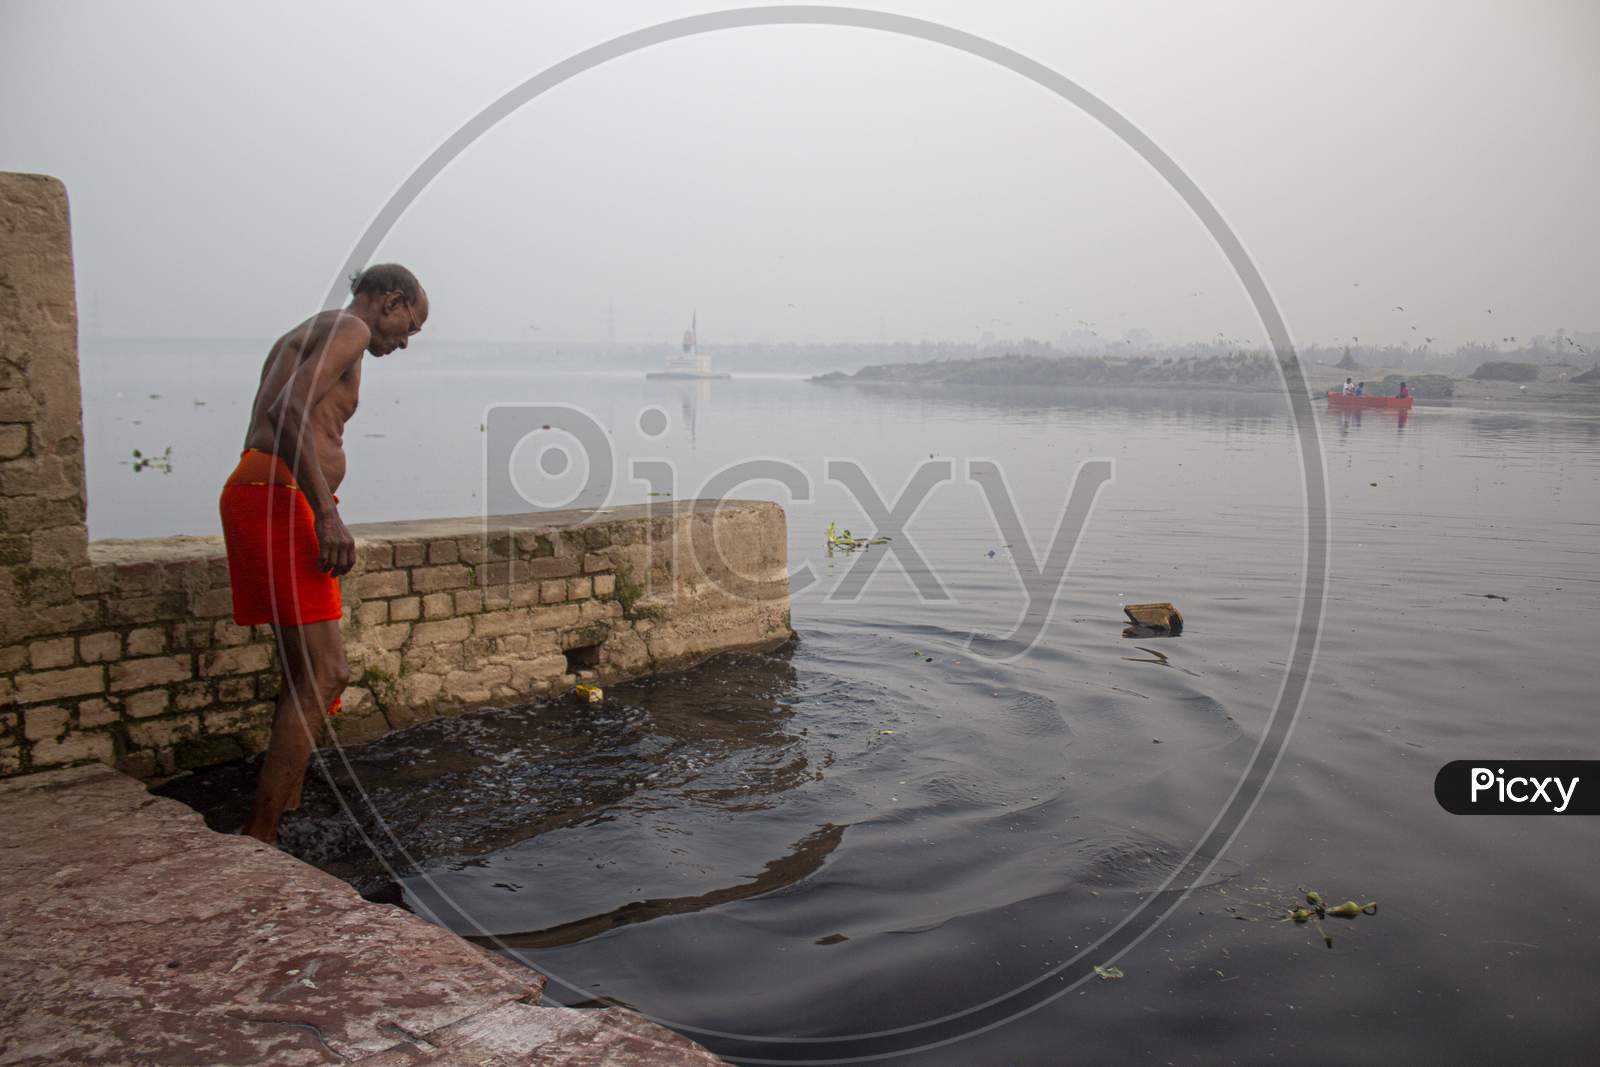 New Delhi, India - July 5 2018 : A Morning At Nigam Bodh Ghat Near Kashmiri Gate, An Old Person Going To Take A Dip In Holy Yamuna.